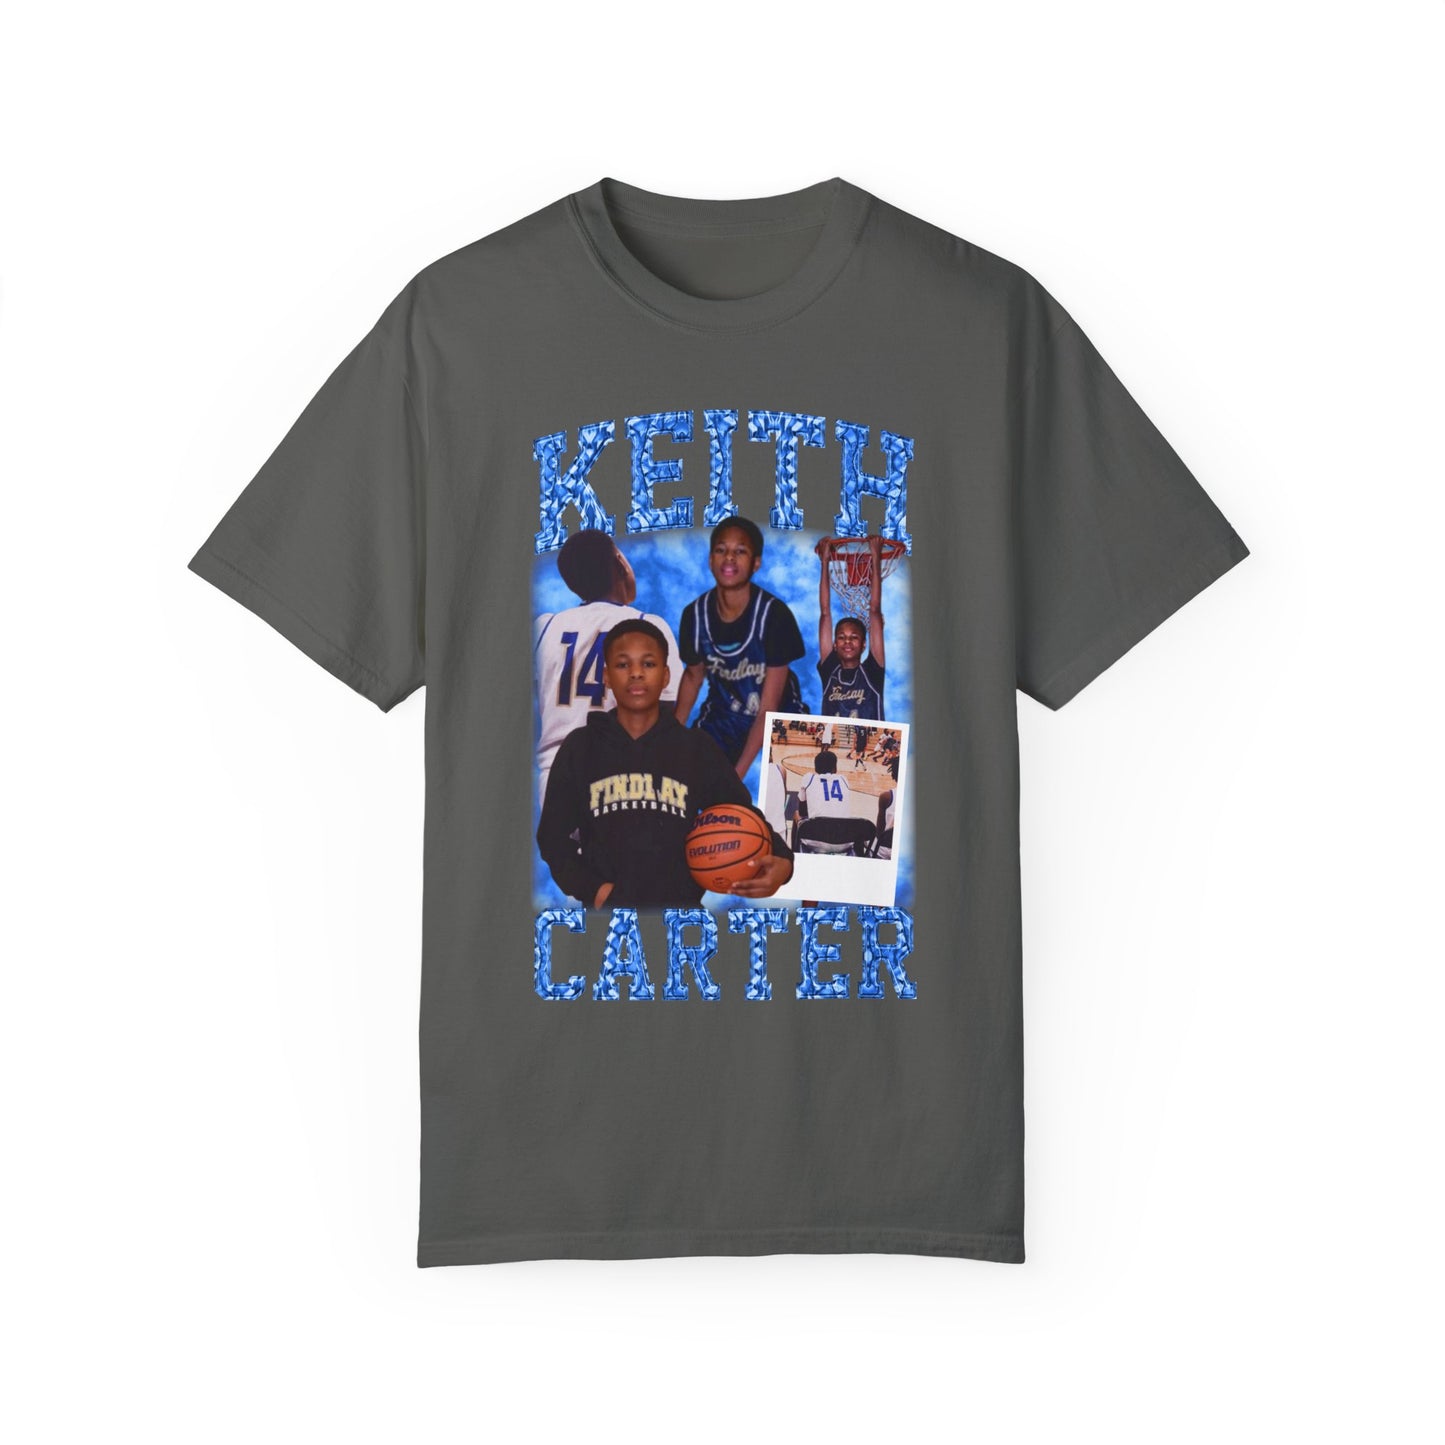 Keith Carter Graphic Tee